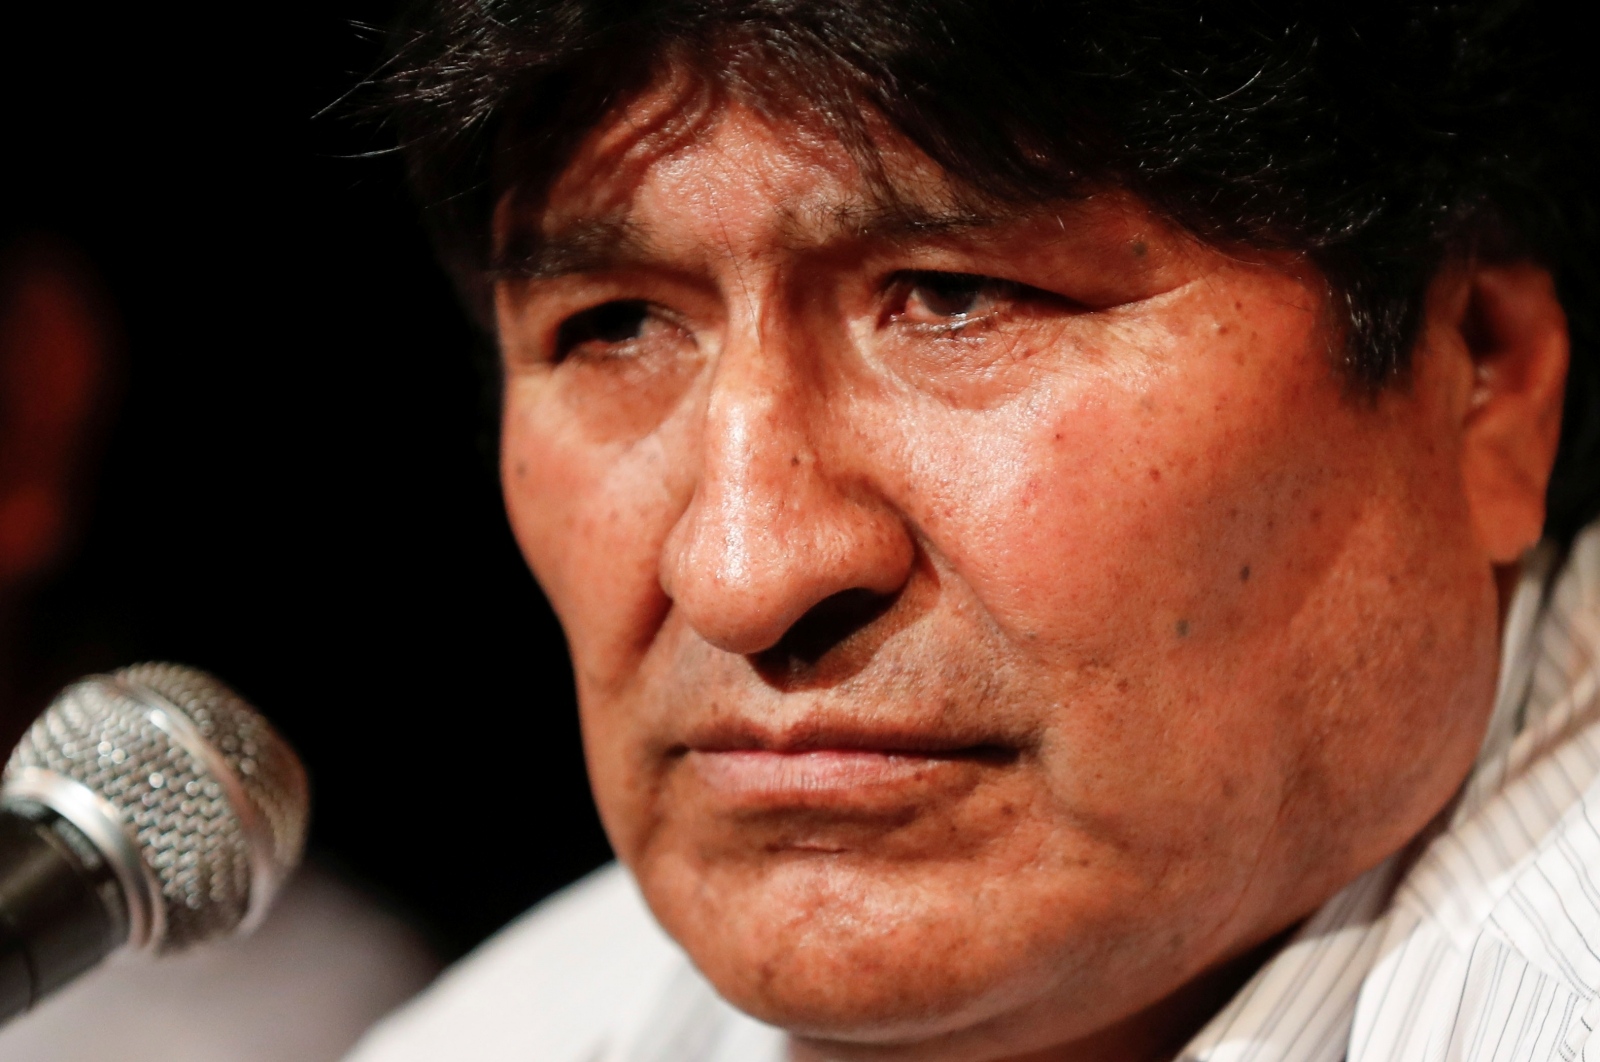 News conference of former Bolivian President Evo Morales Former Bolivian President Evo Morales looks on during a news conference in Buenos Aires, Argentina December 17, 2019. REUTERS/Agustin Marcarian AGUSTIN MARCARIAN